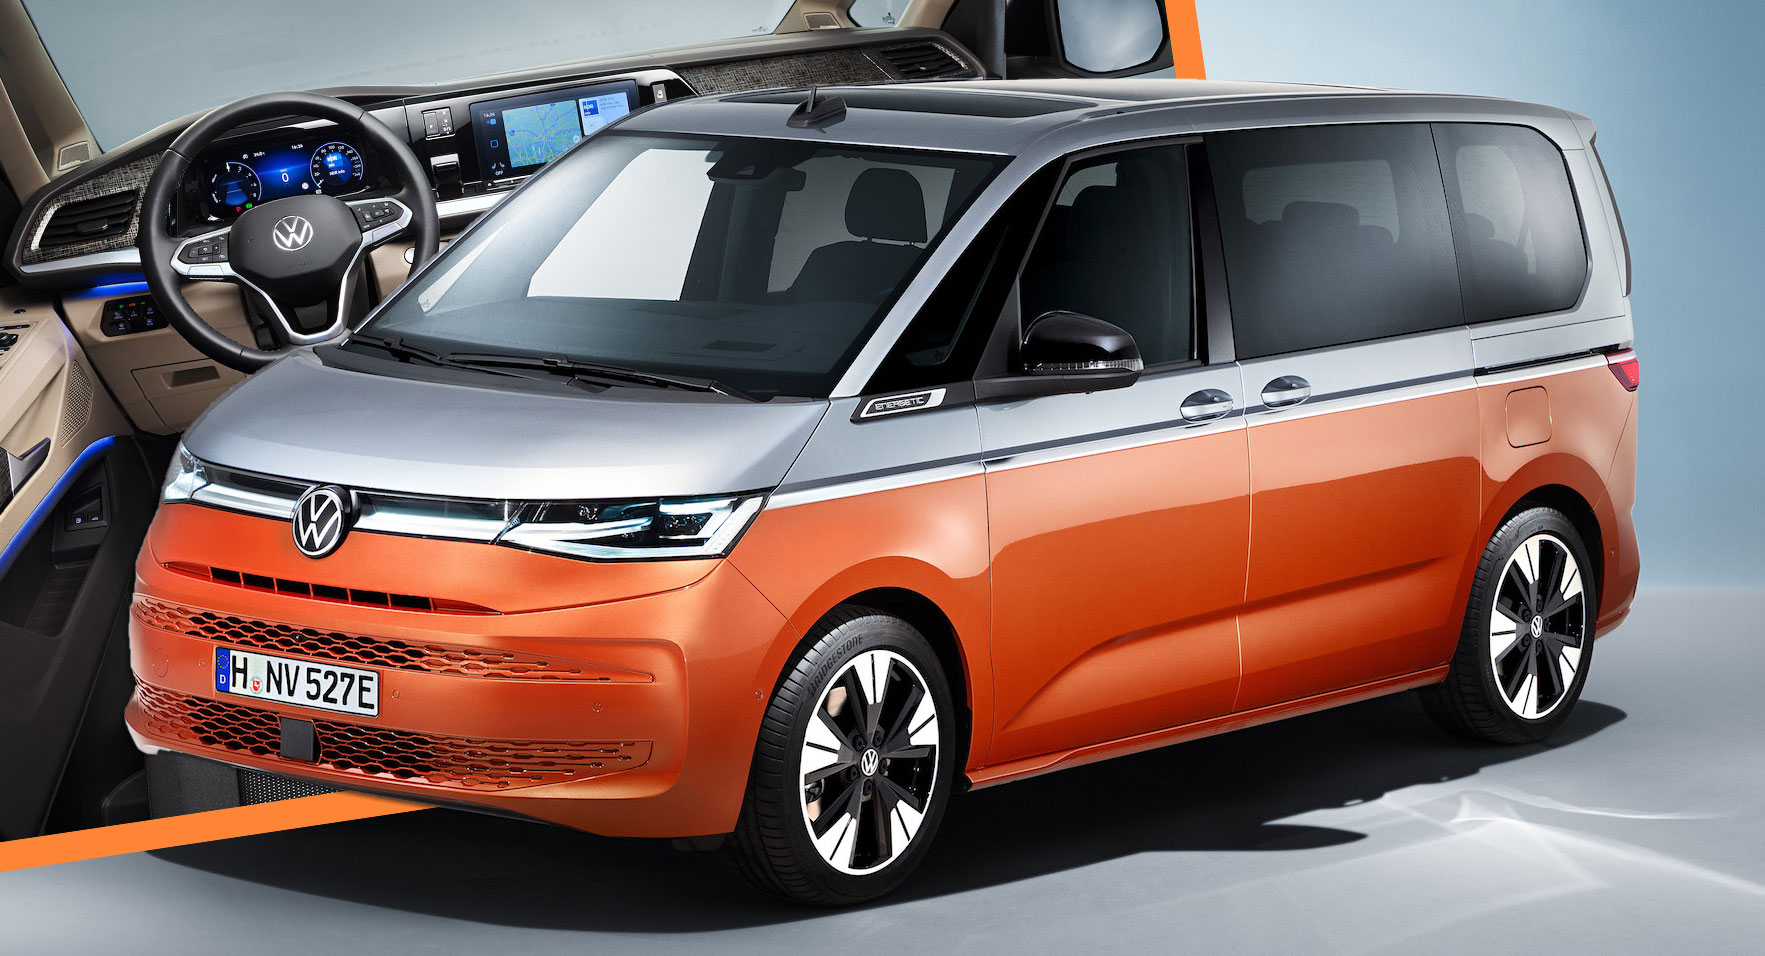 2022 VW T7 Multivan: Forget Flower Power, It's All About Hybrid Power